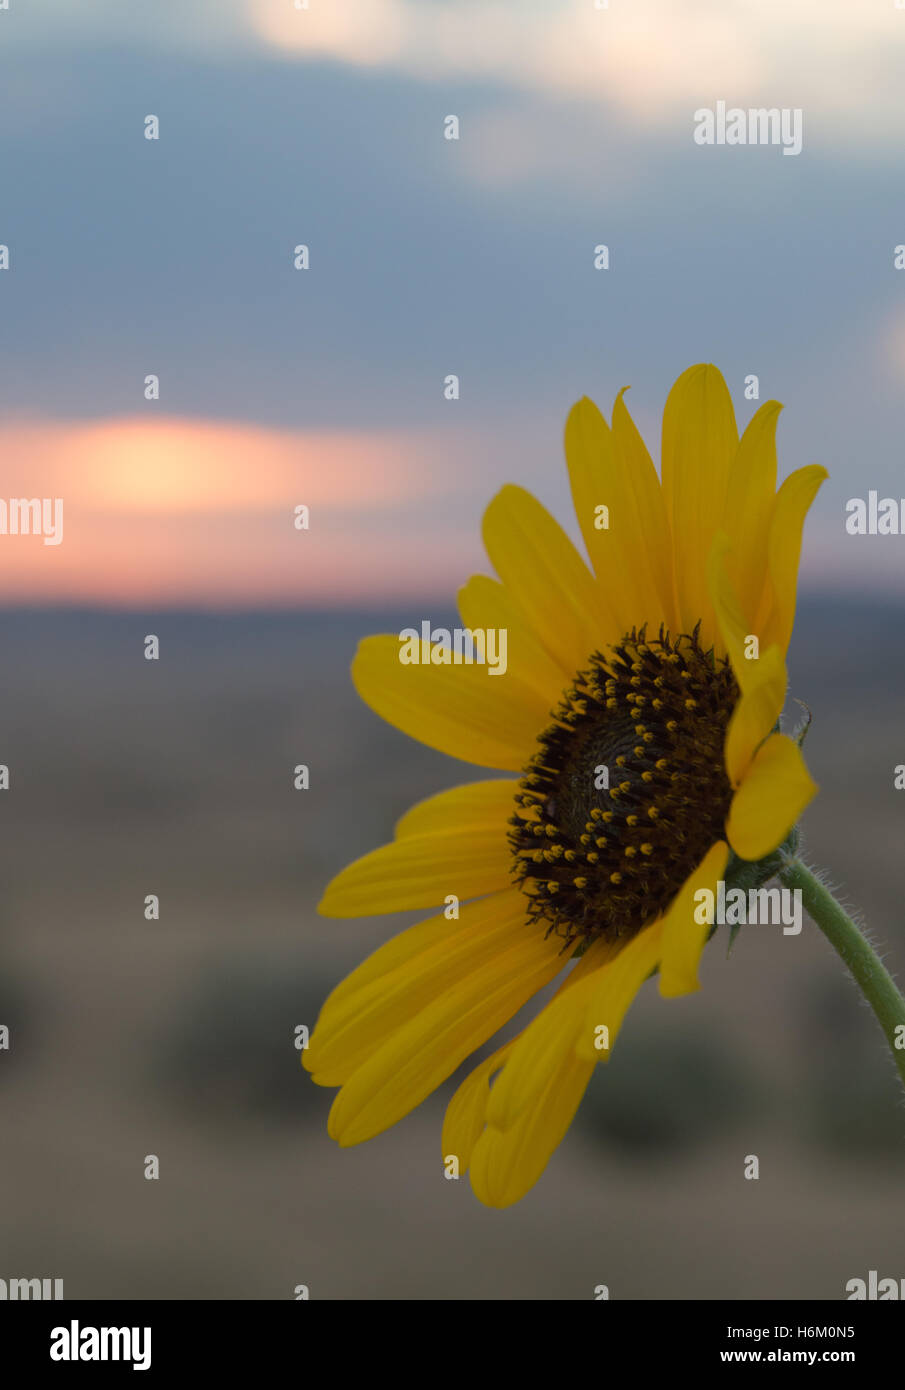 Close Up of a Prairie Sunflower in Profile with a Field and Sunrise in the  Background Stock Photo - Alamy